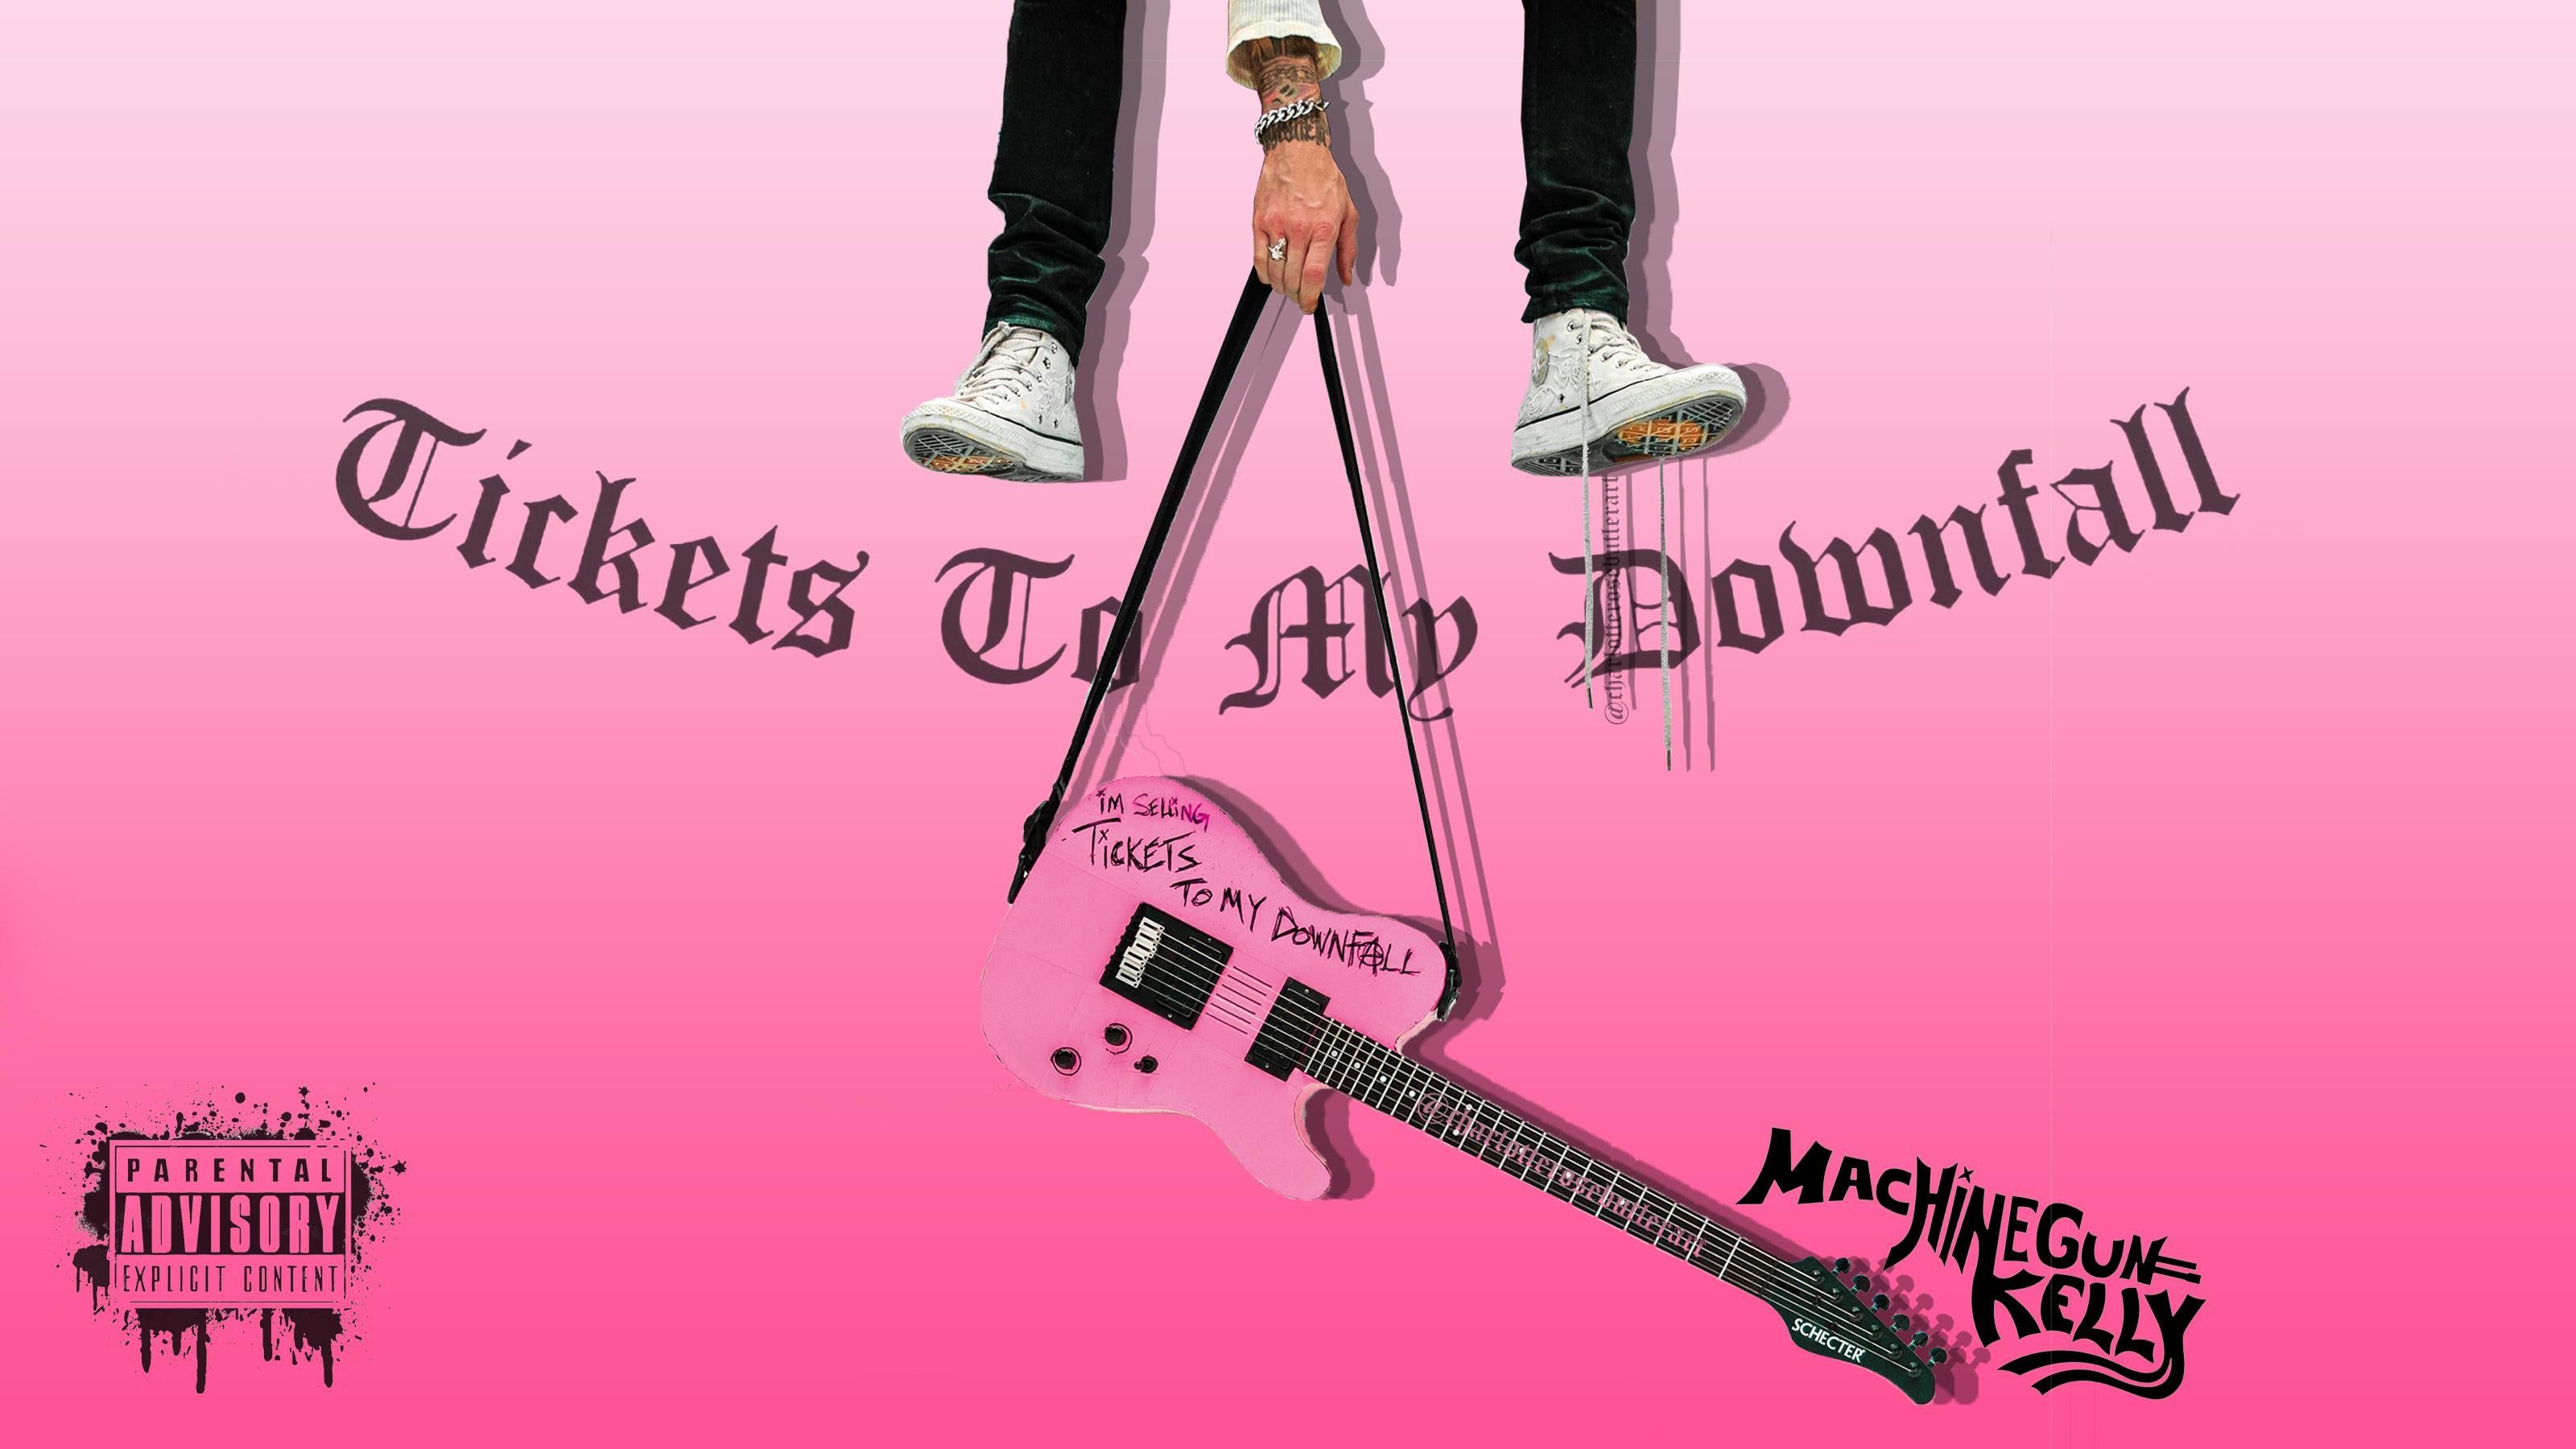 Tickets to my Downfall Wallpaper